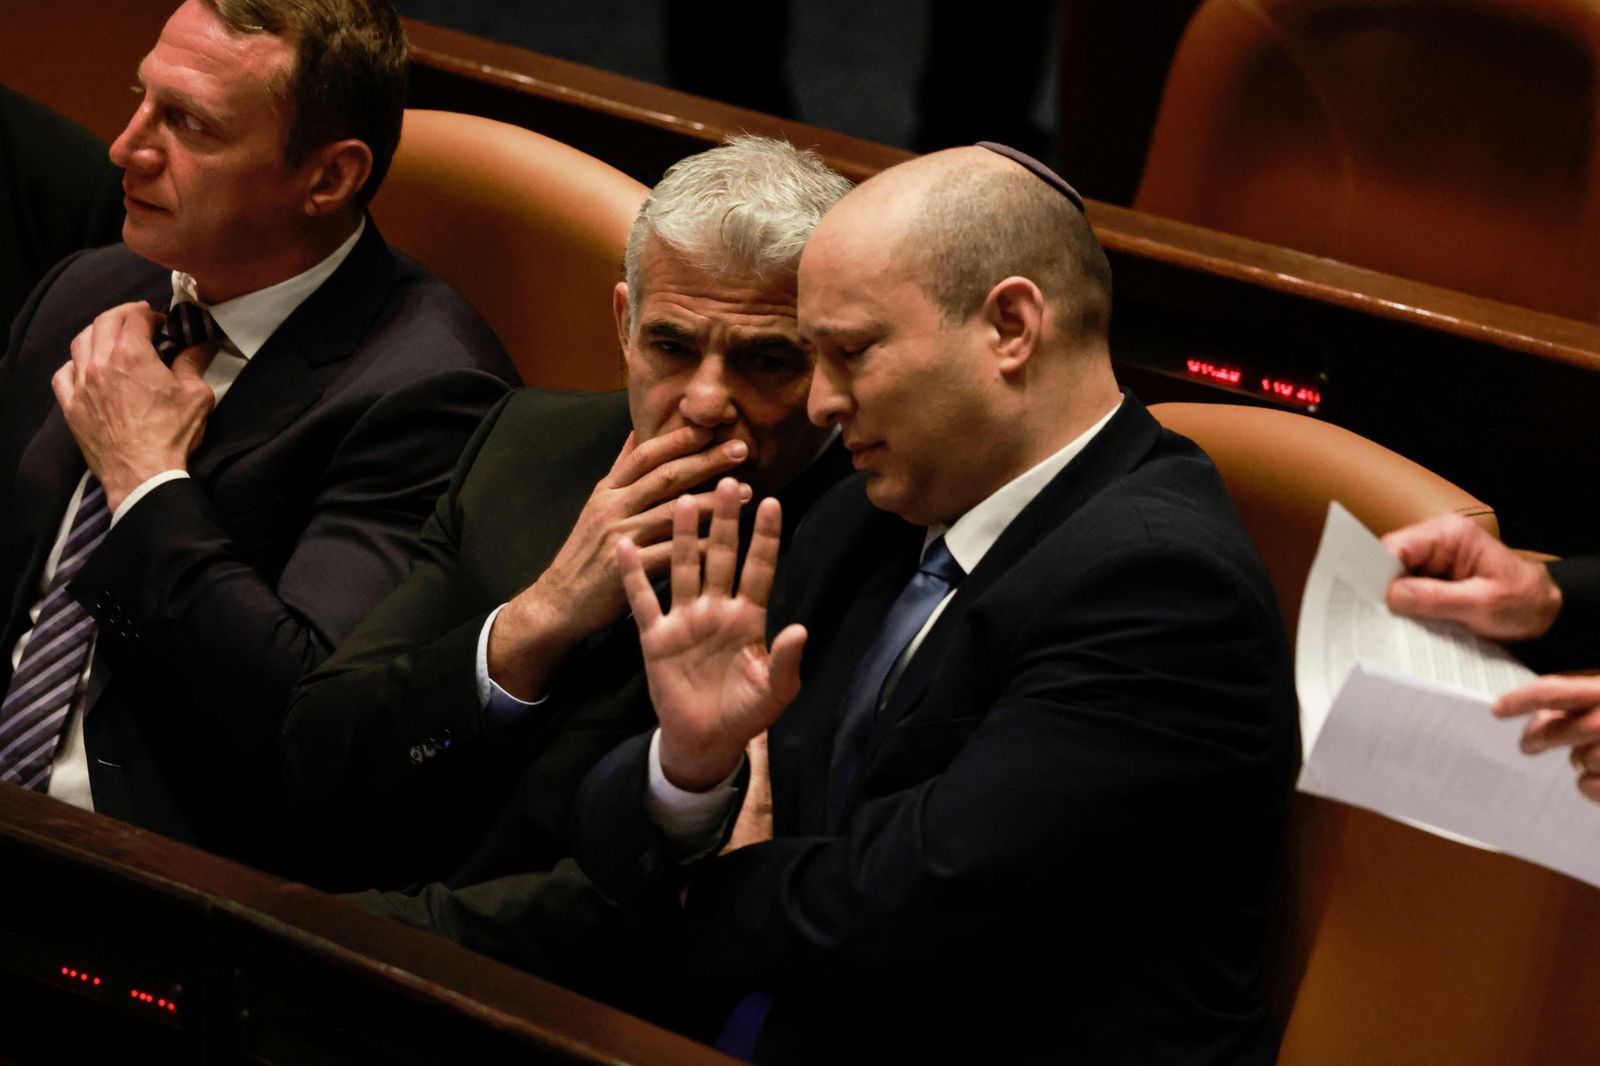 Israeli Minister of Foreign Affairs Yair Lapid (R) and outgoing Prime Minister Naftali Bennett, speak to each other at the Knesset (parliament), following the dissolution of the parliament, in Jerusalem on June 30, 2022. - Israeli lawmakers dissolved parliament today, forcing the country's fifth election in less than four years, with Foreign Minister Yair Lapid set to take over as caretaker prime minister at midnight. The final dissolution bill, which passed with 92 votes in favour none against, ends the year-long premiership of Naftali Bennett, who led an eight-party coalition that was backed by an Arab party, a first in Israeli history. (Photo by Menahem KAHANA / AFP) - AFP